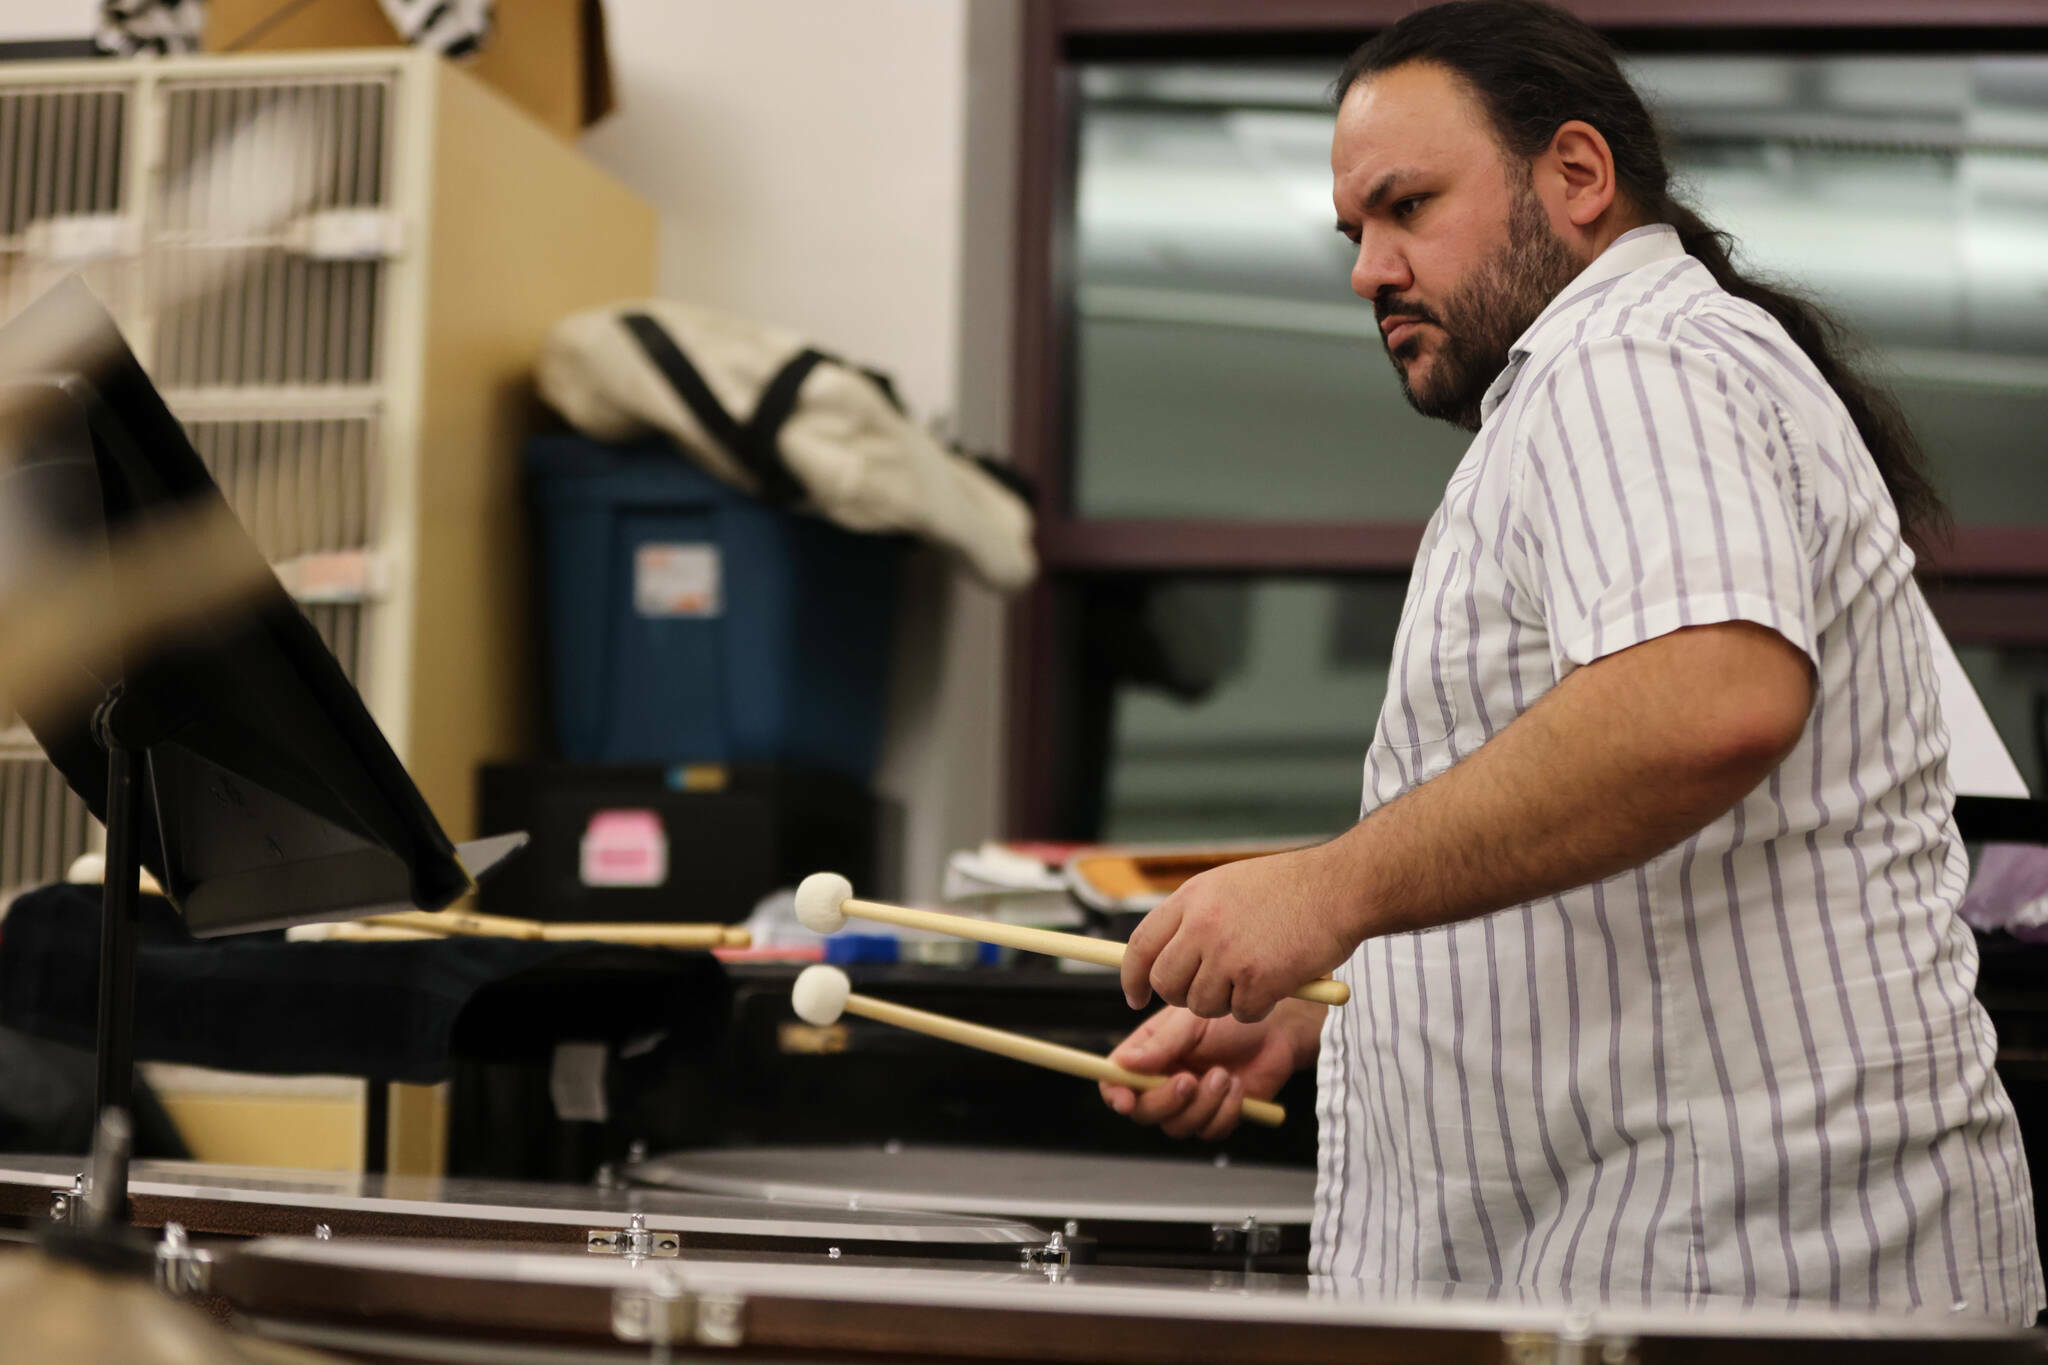 Ben Hohenstatt / Juneau Empire file
Percussionist Ed Littlefield prepares to strike a timpani during rehearsals for Juneau Symphony’s Holiday Cheer concert last December. He will appear with the Julia Keefe Indigenous Big Band during this year’s Juneau Jazz Classics festival.